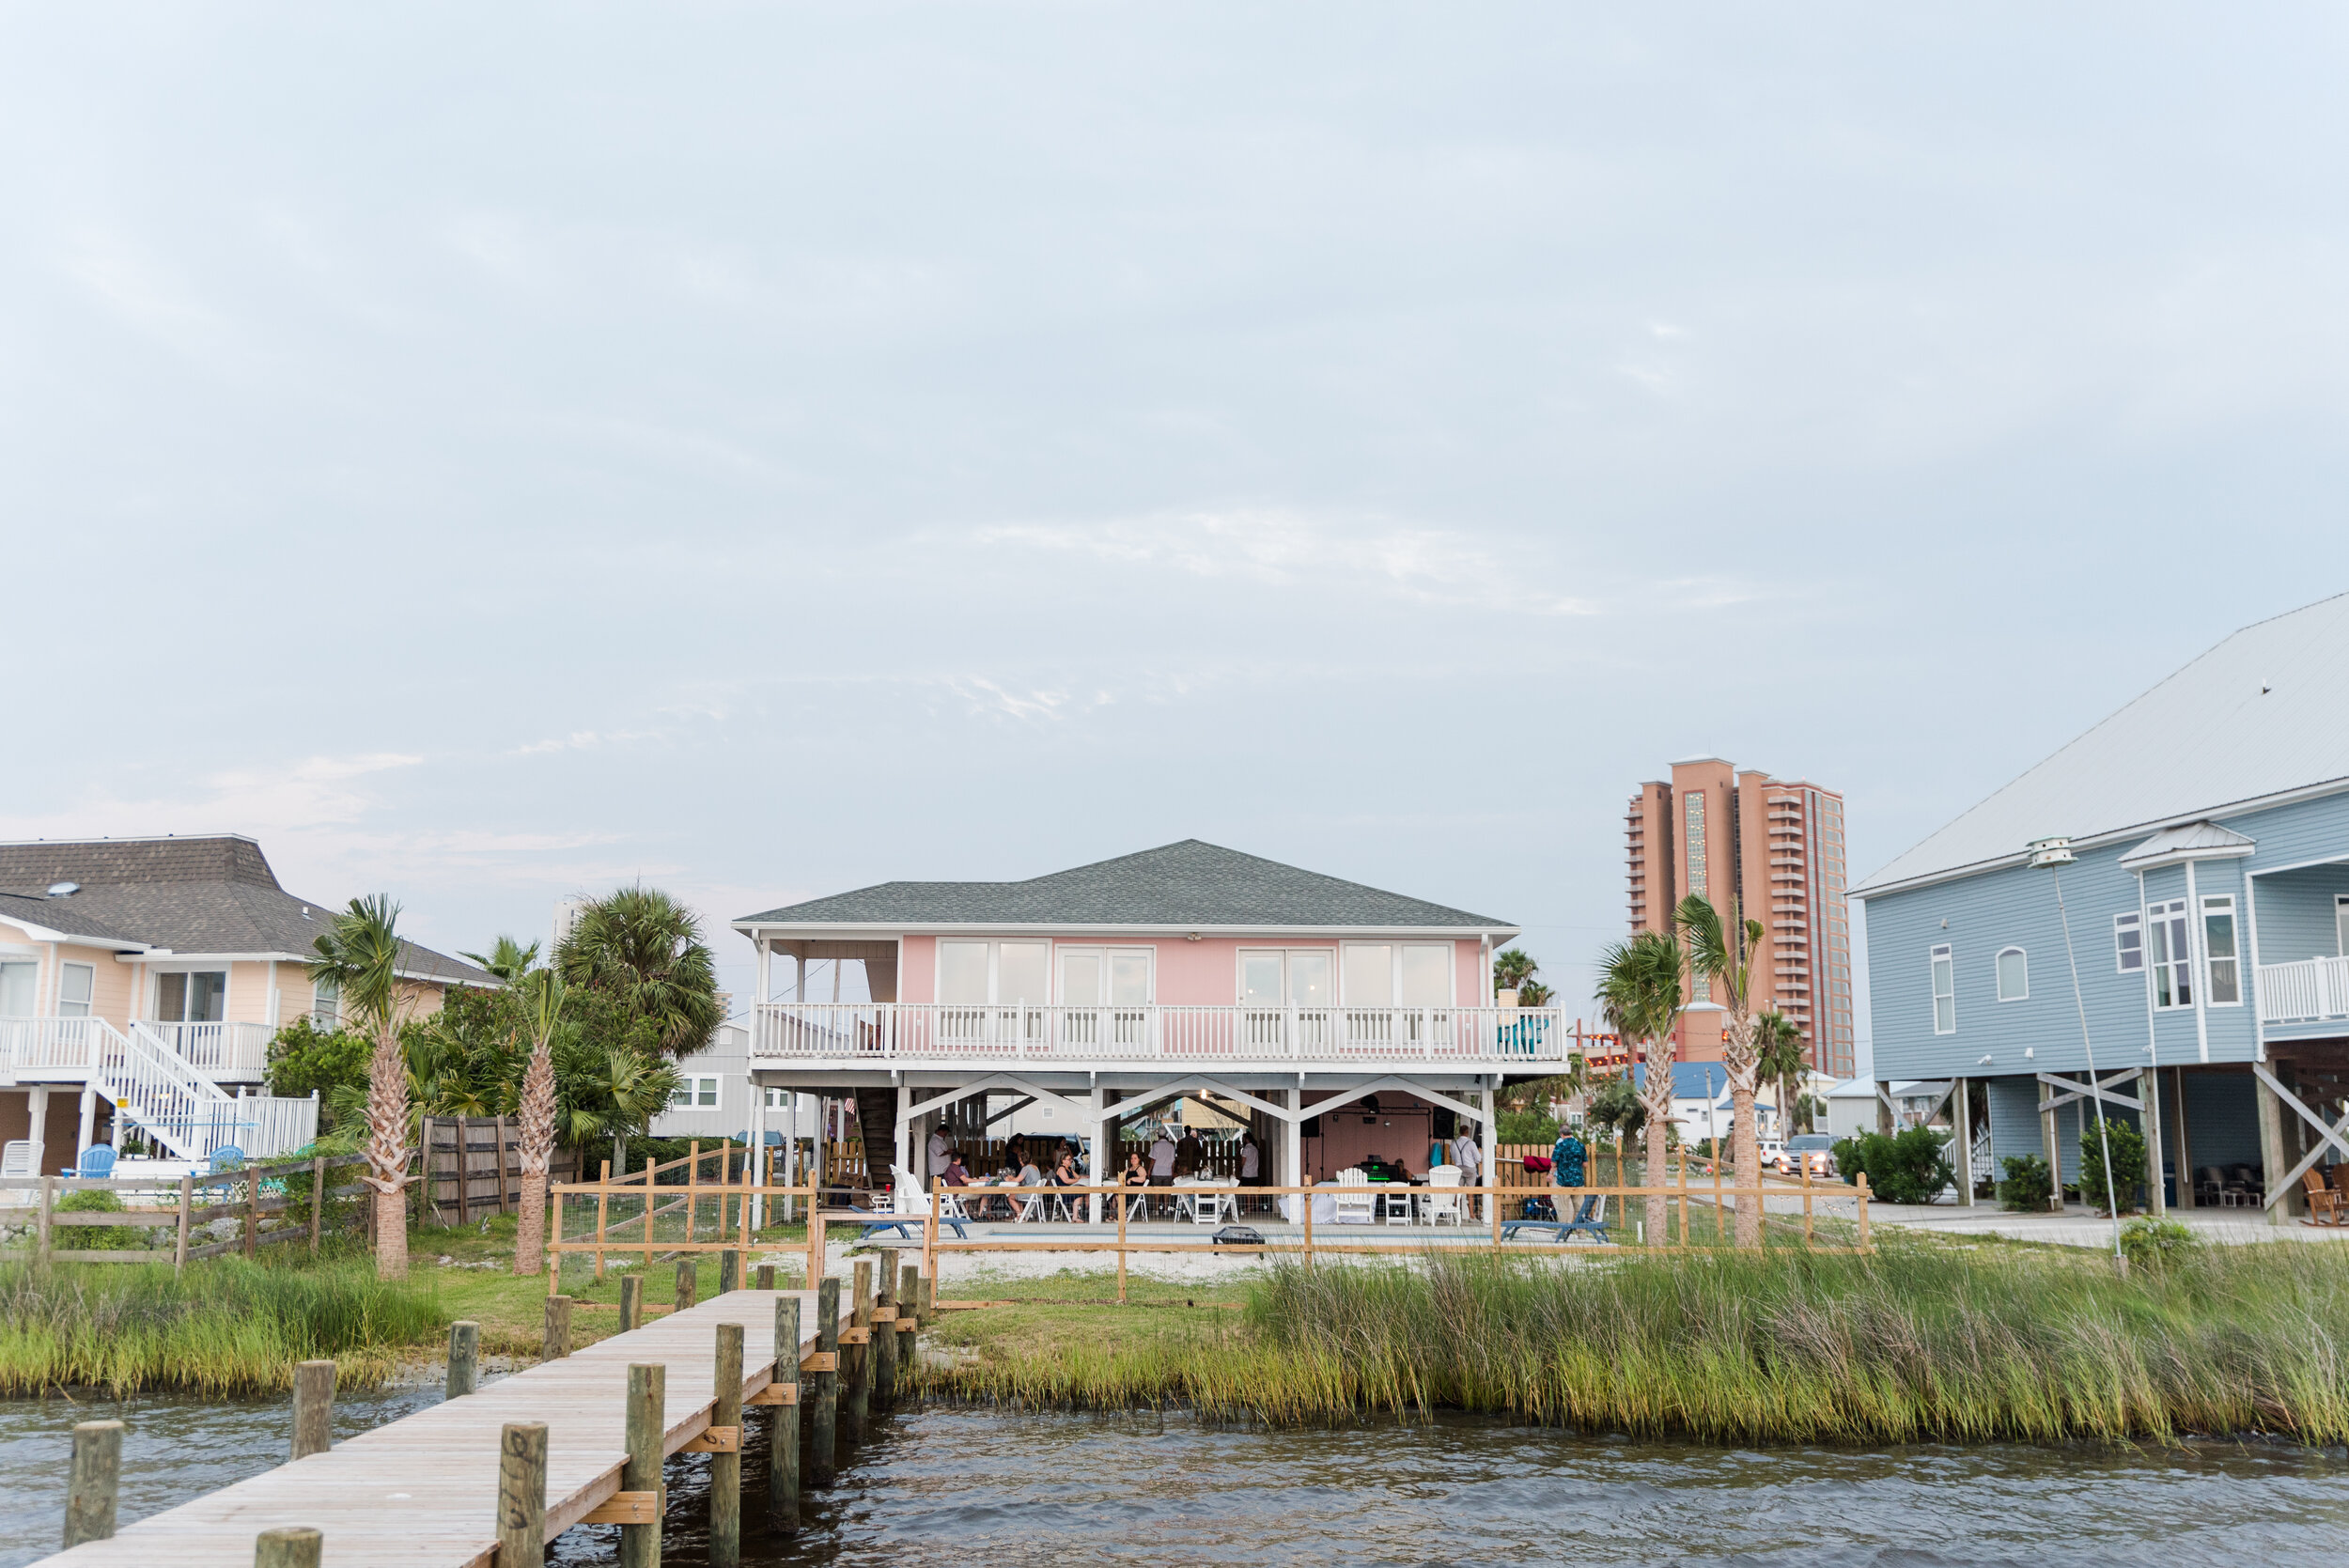 July Orange Beach Wedding Reception Photographed by Kristen Marcus Photography